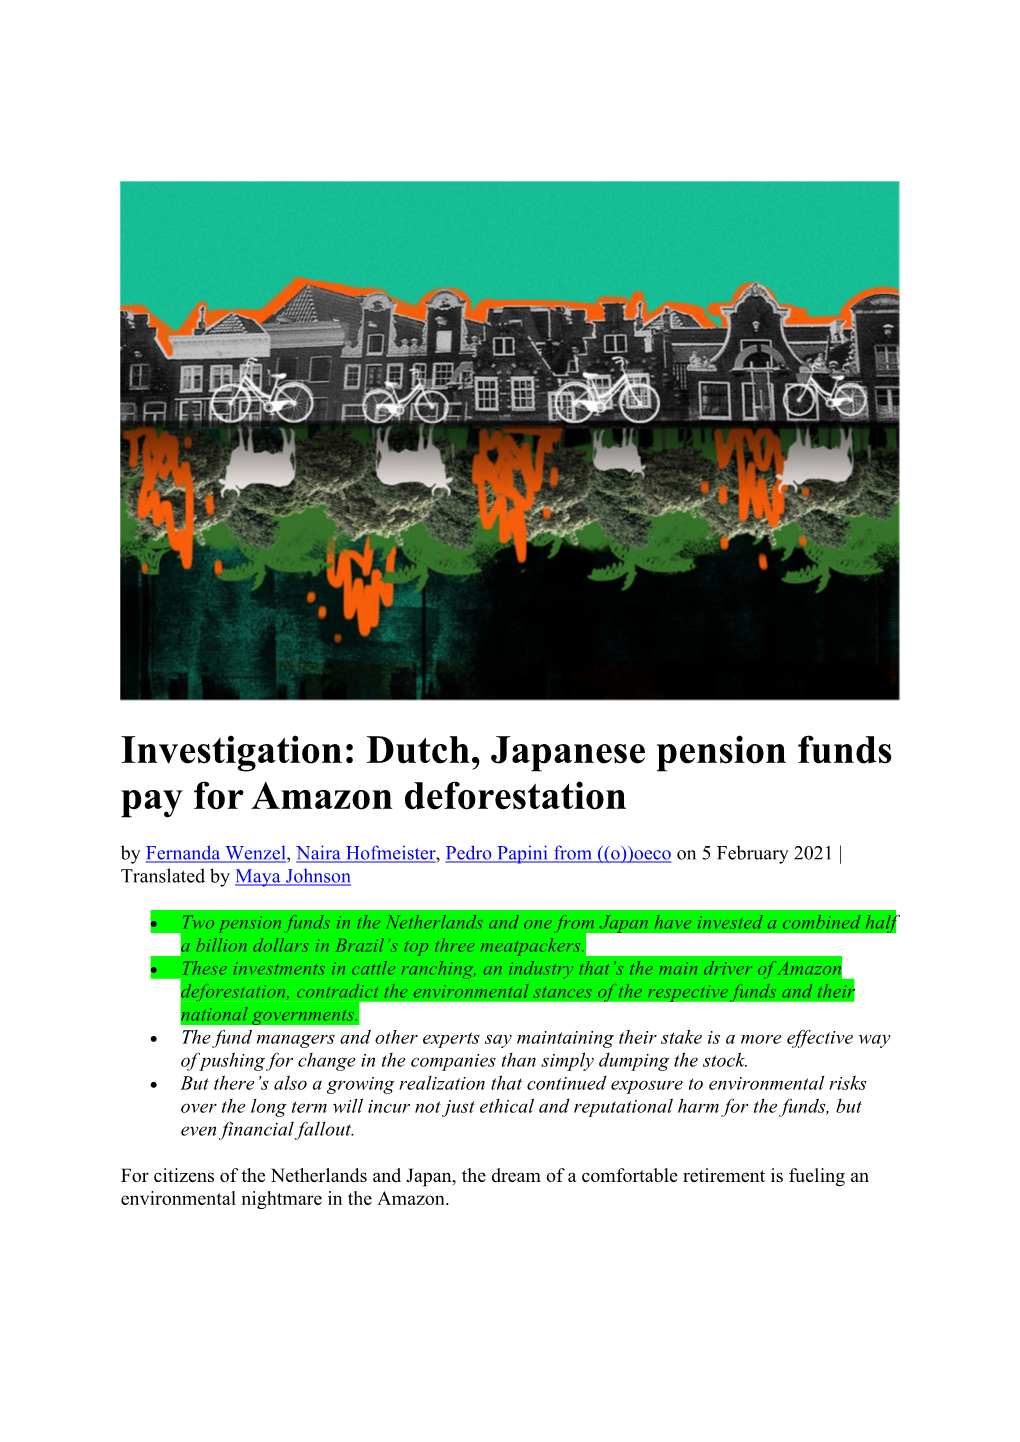 Dutch, Japanese Pension Funds Pay for Amazon Deforestation